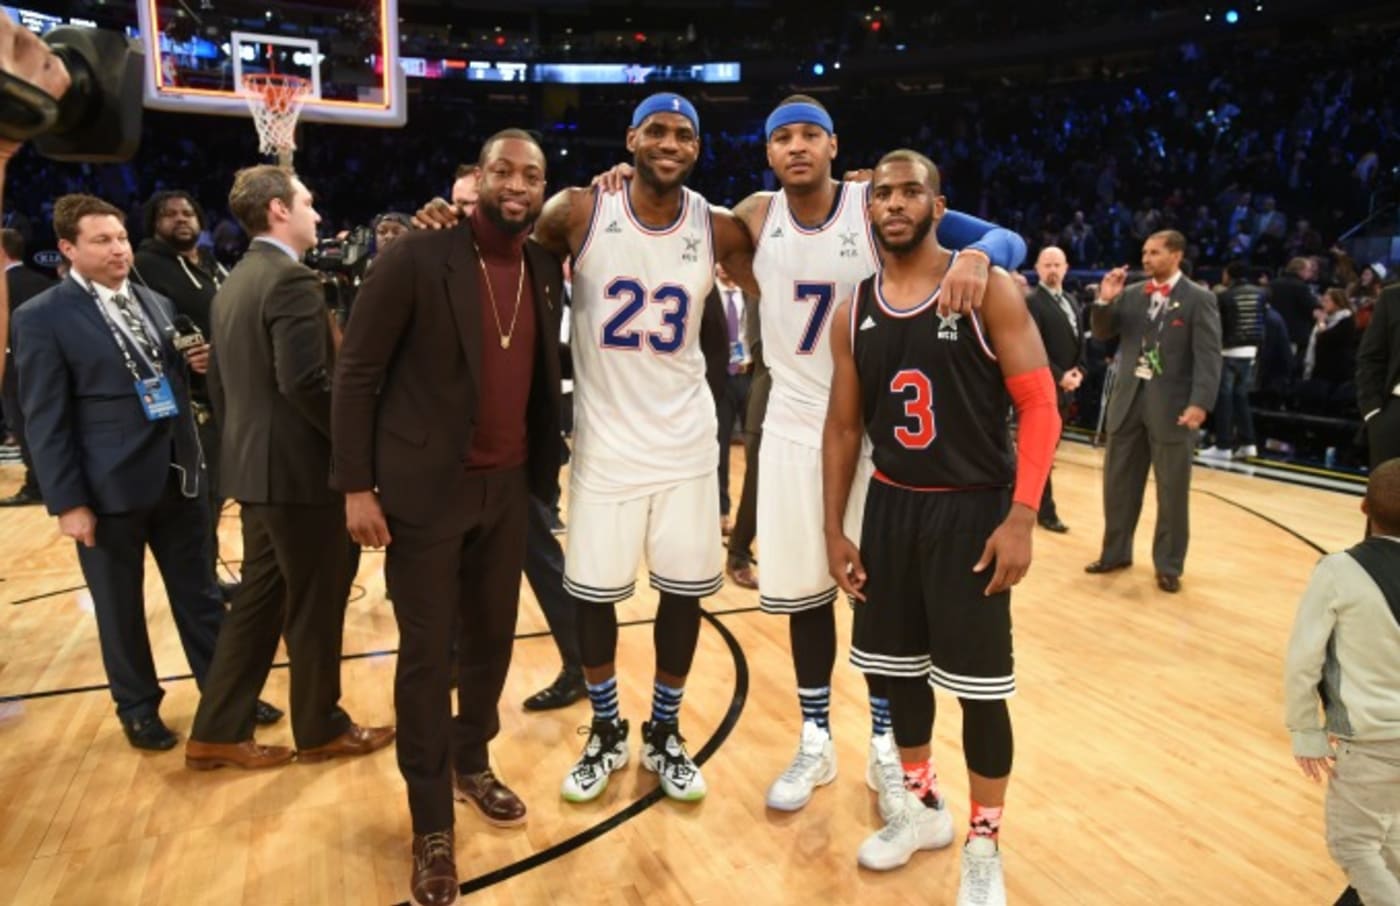 Dwyane Wade, LeBron James, Carmelo Anthony, and Chris Paul at the NBA All Star Game.